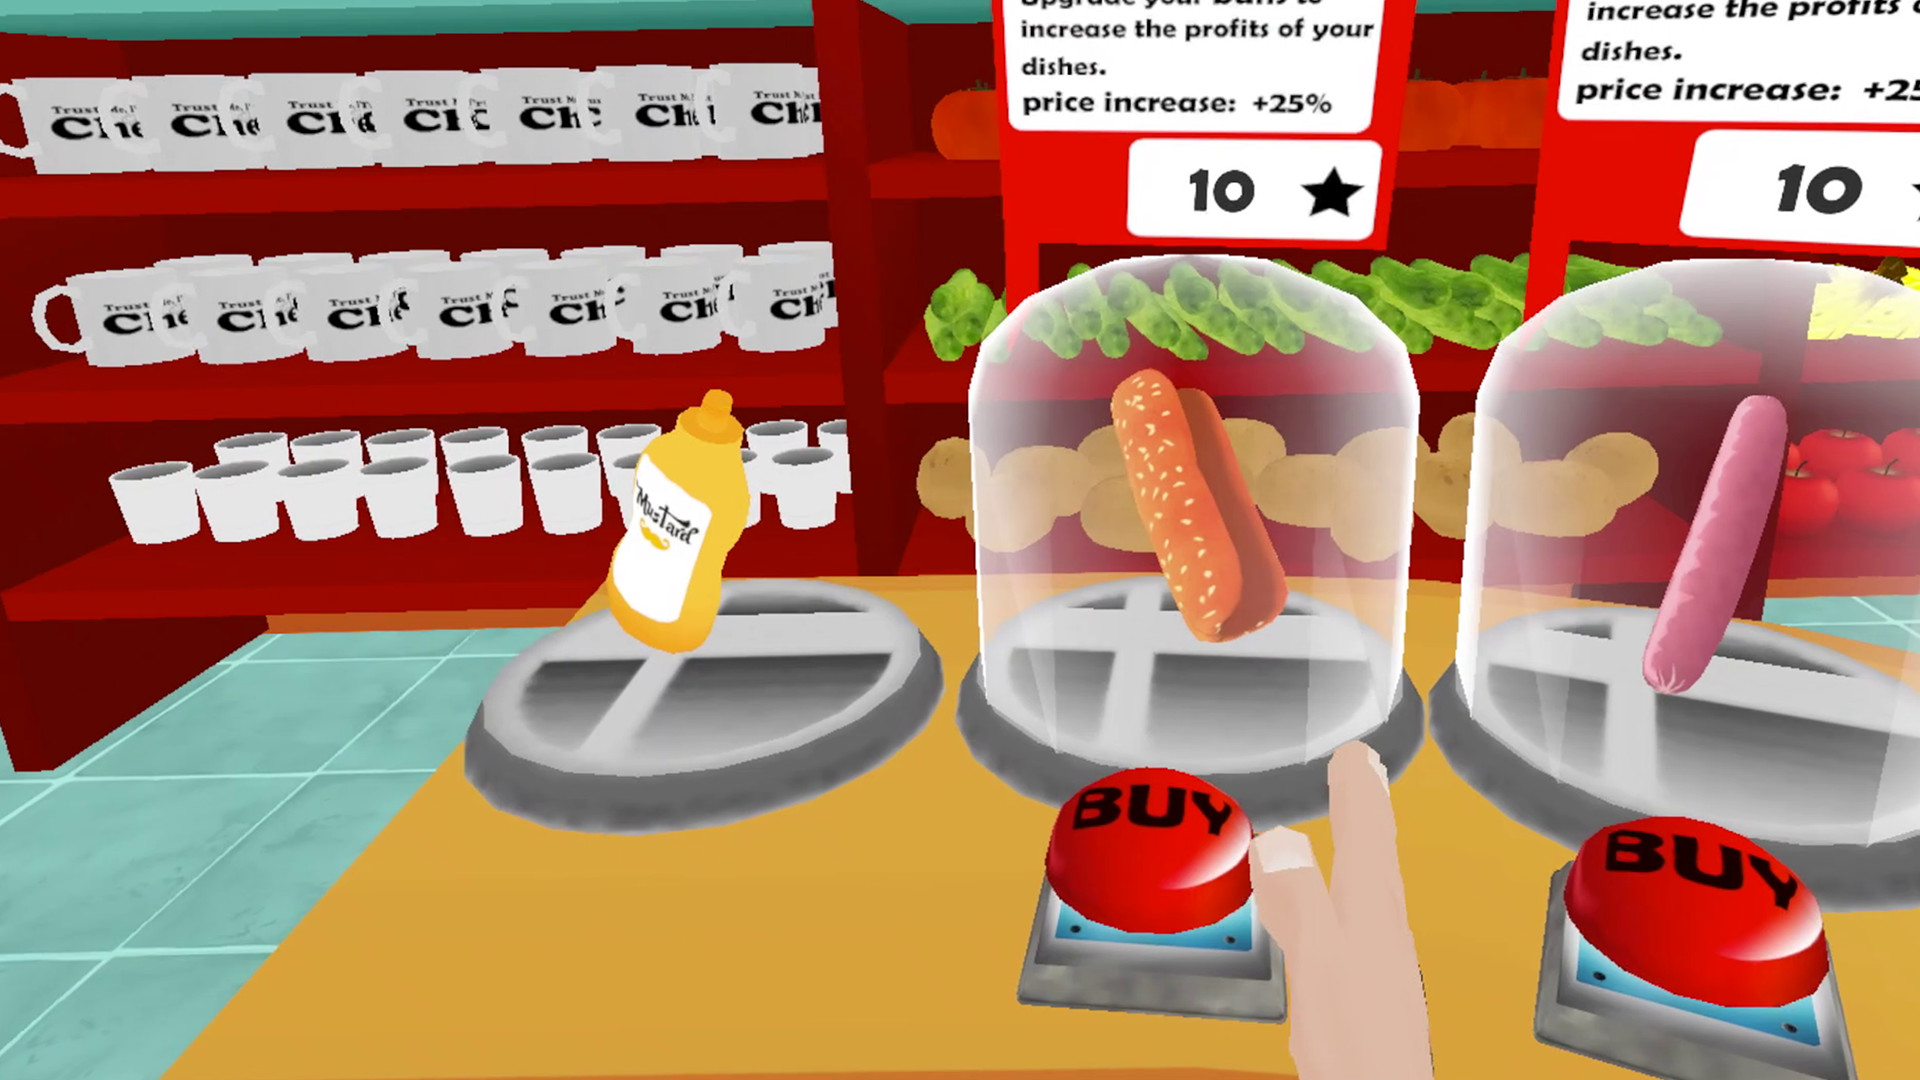 The Cooking Game VR screenshot